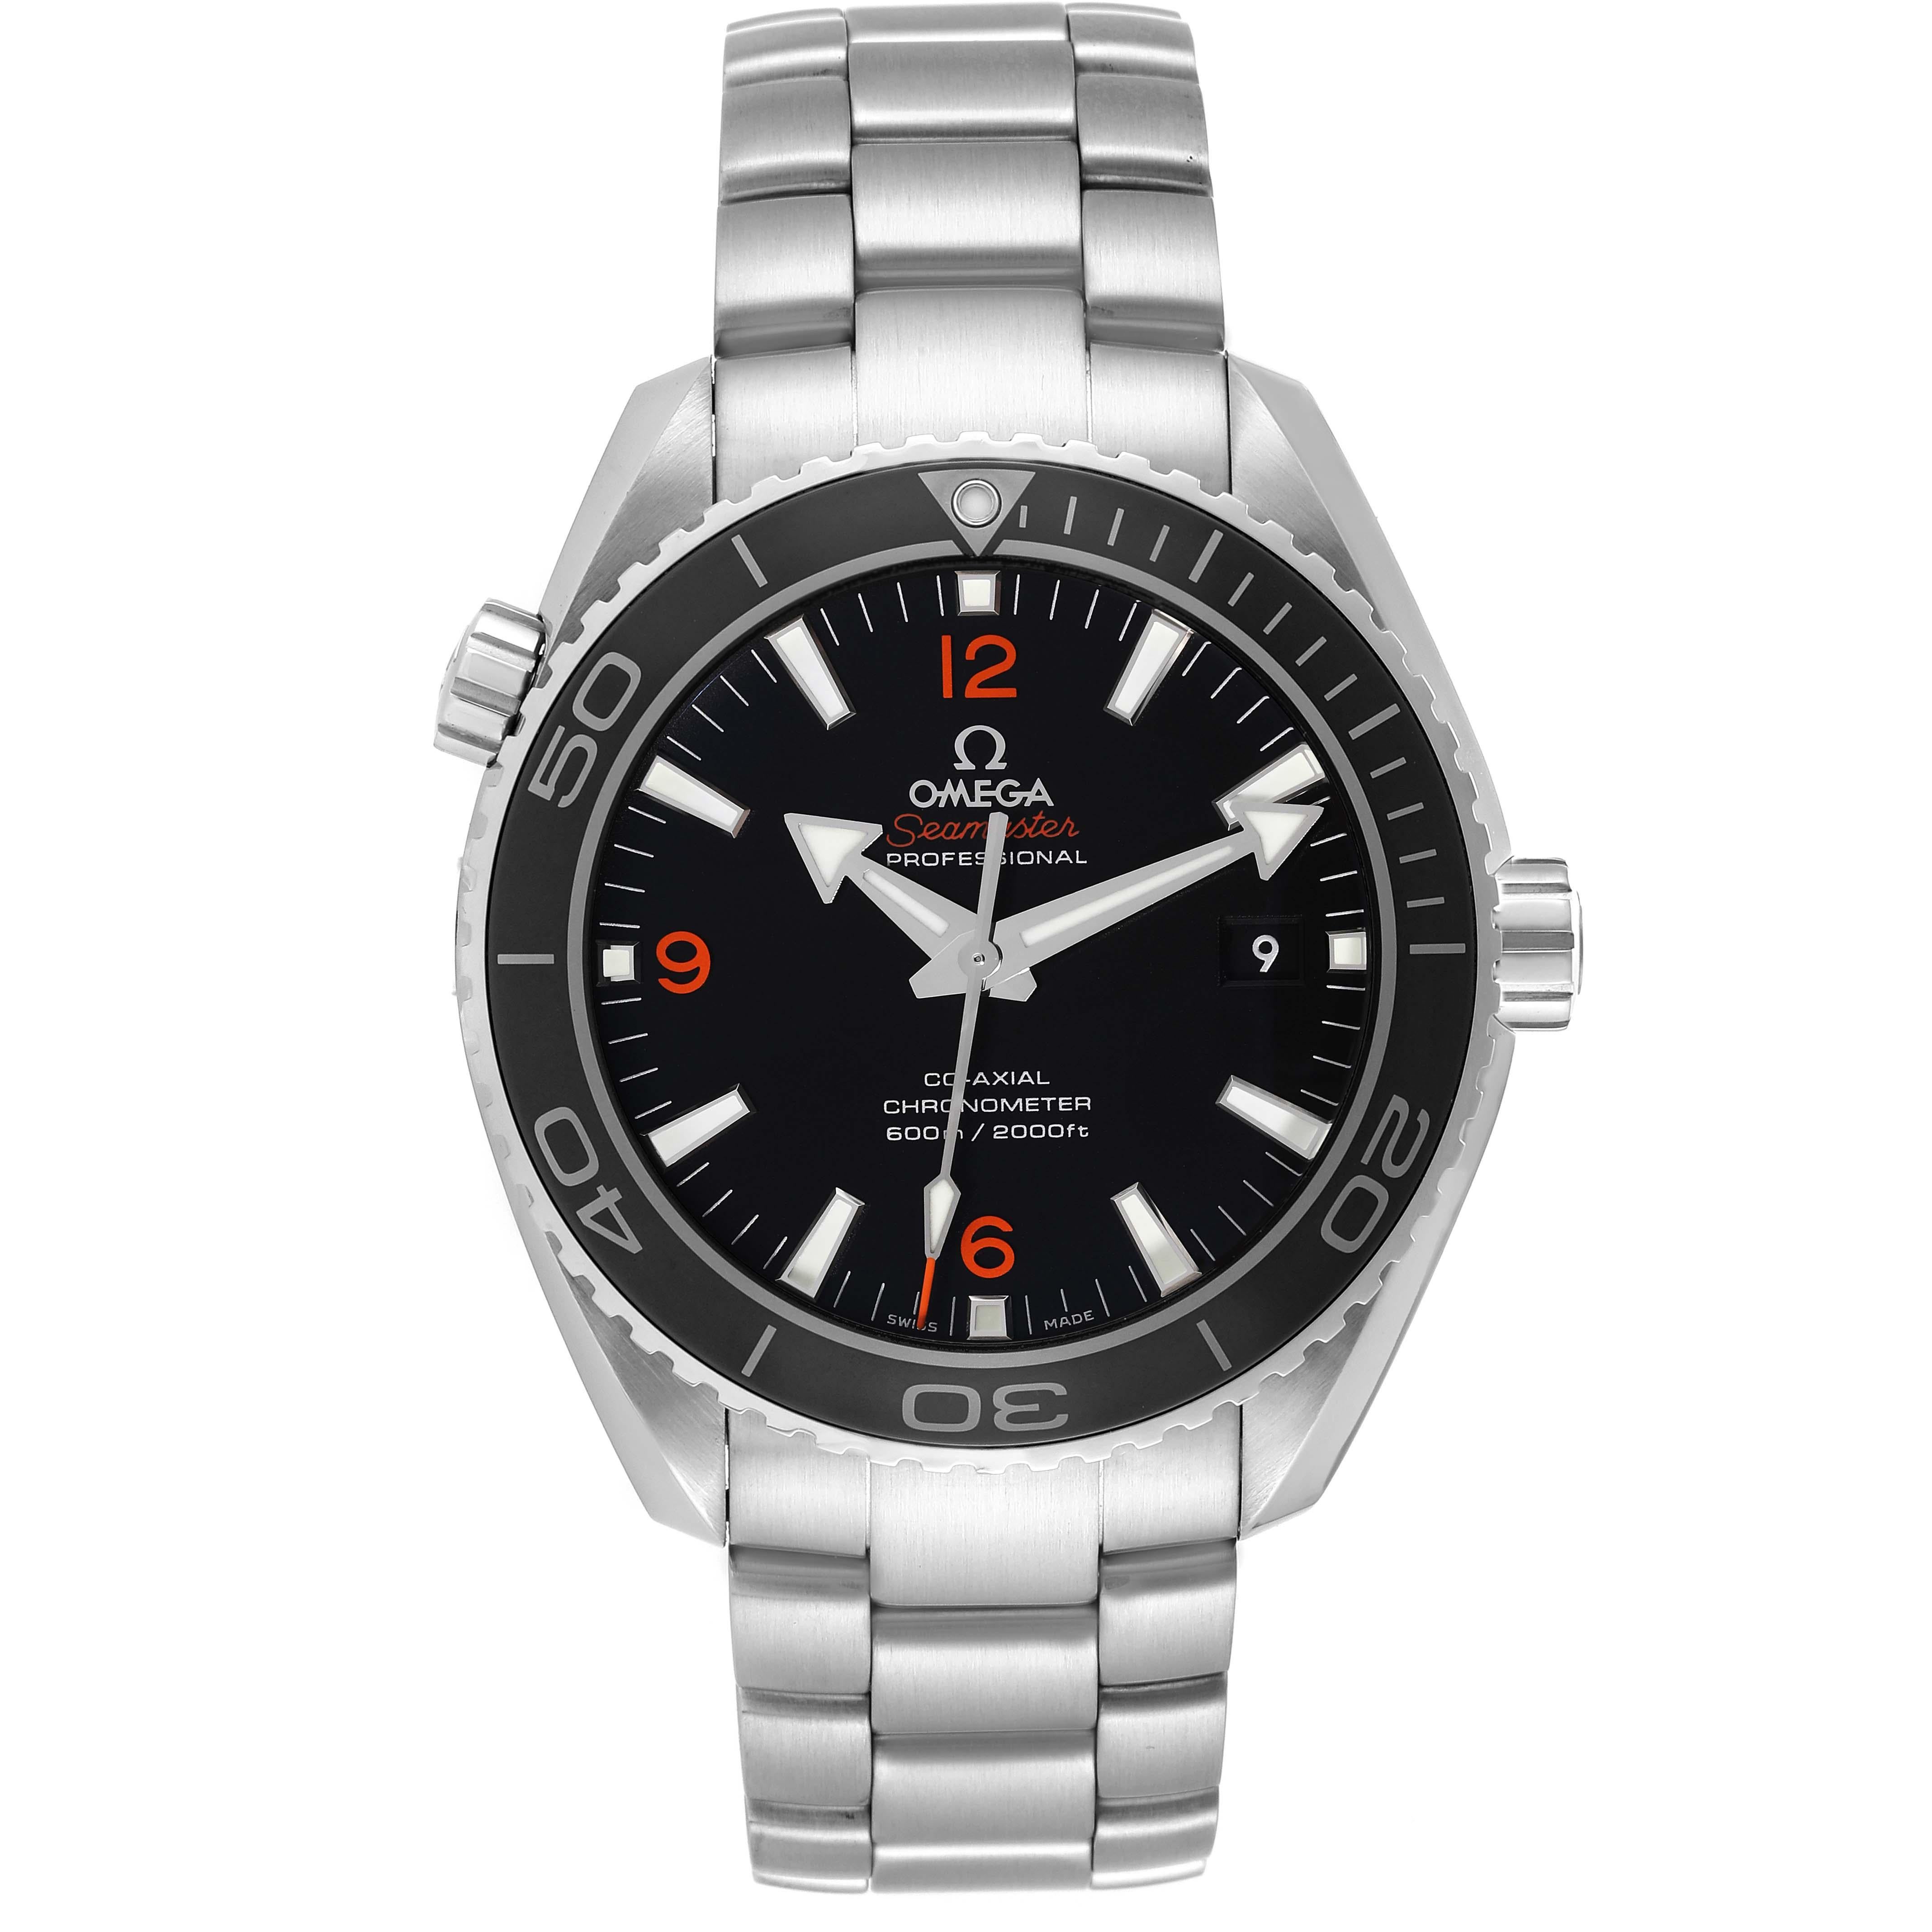 Omega Seamaster Planet Ocean Steel Mens Watch 232.30.46.21.01.003 Box Card. Automatic self-winding chronograph movement with column wheel mechanism and Co-Axial Escapement for greater precision, stability and durability of the movement. Silicon